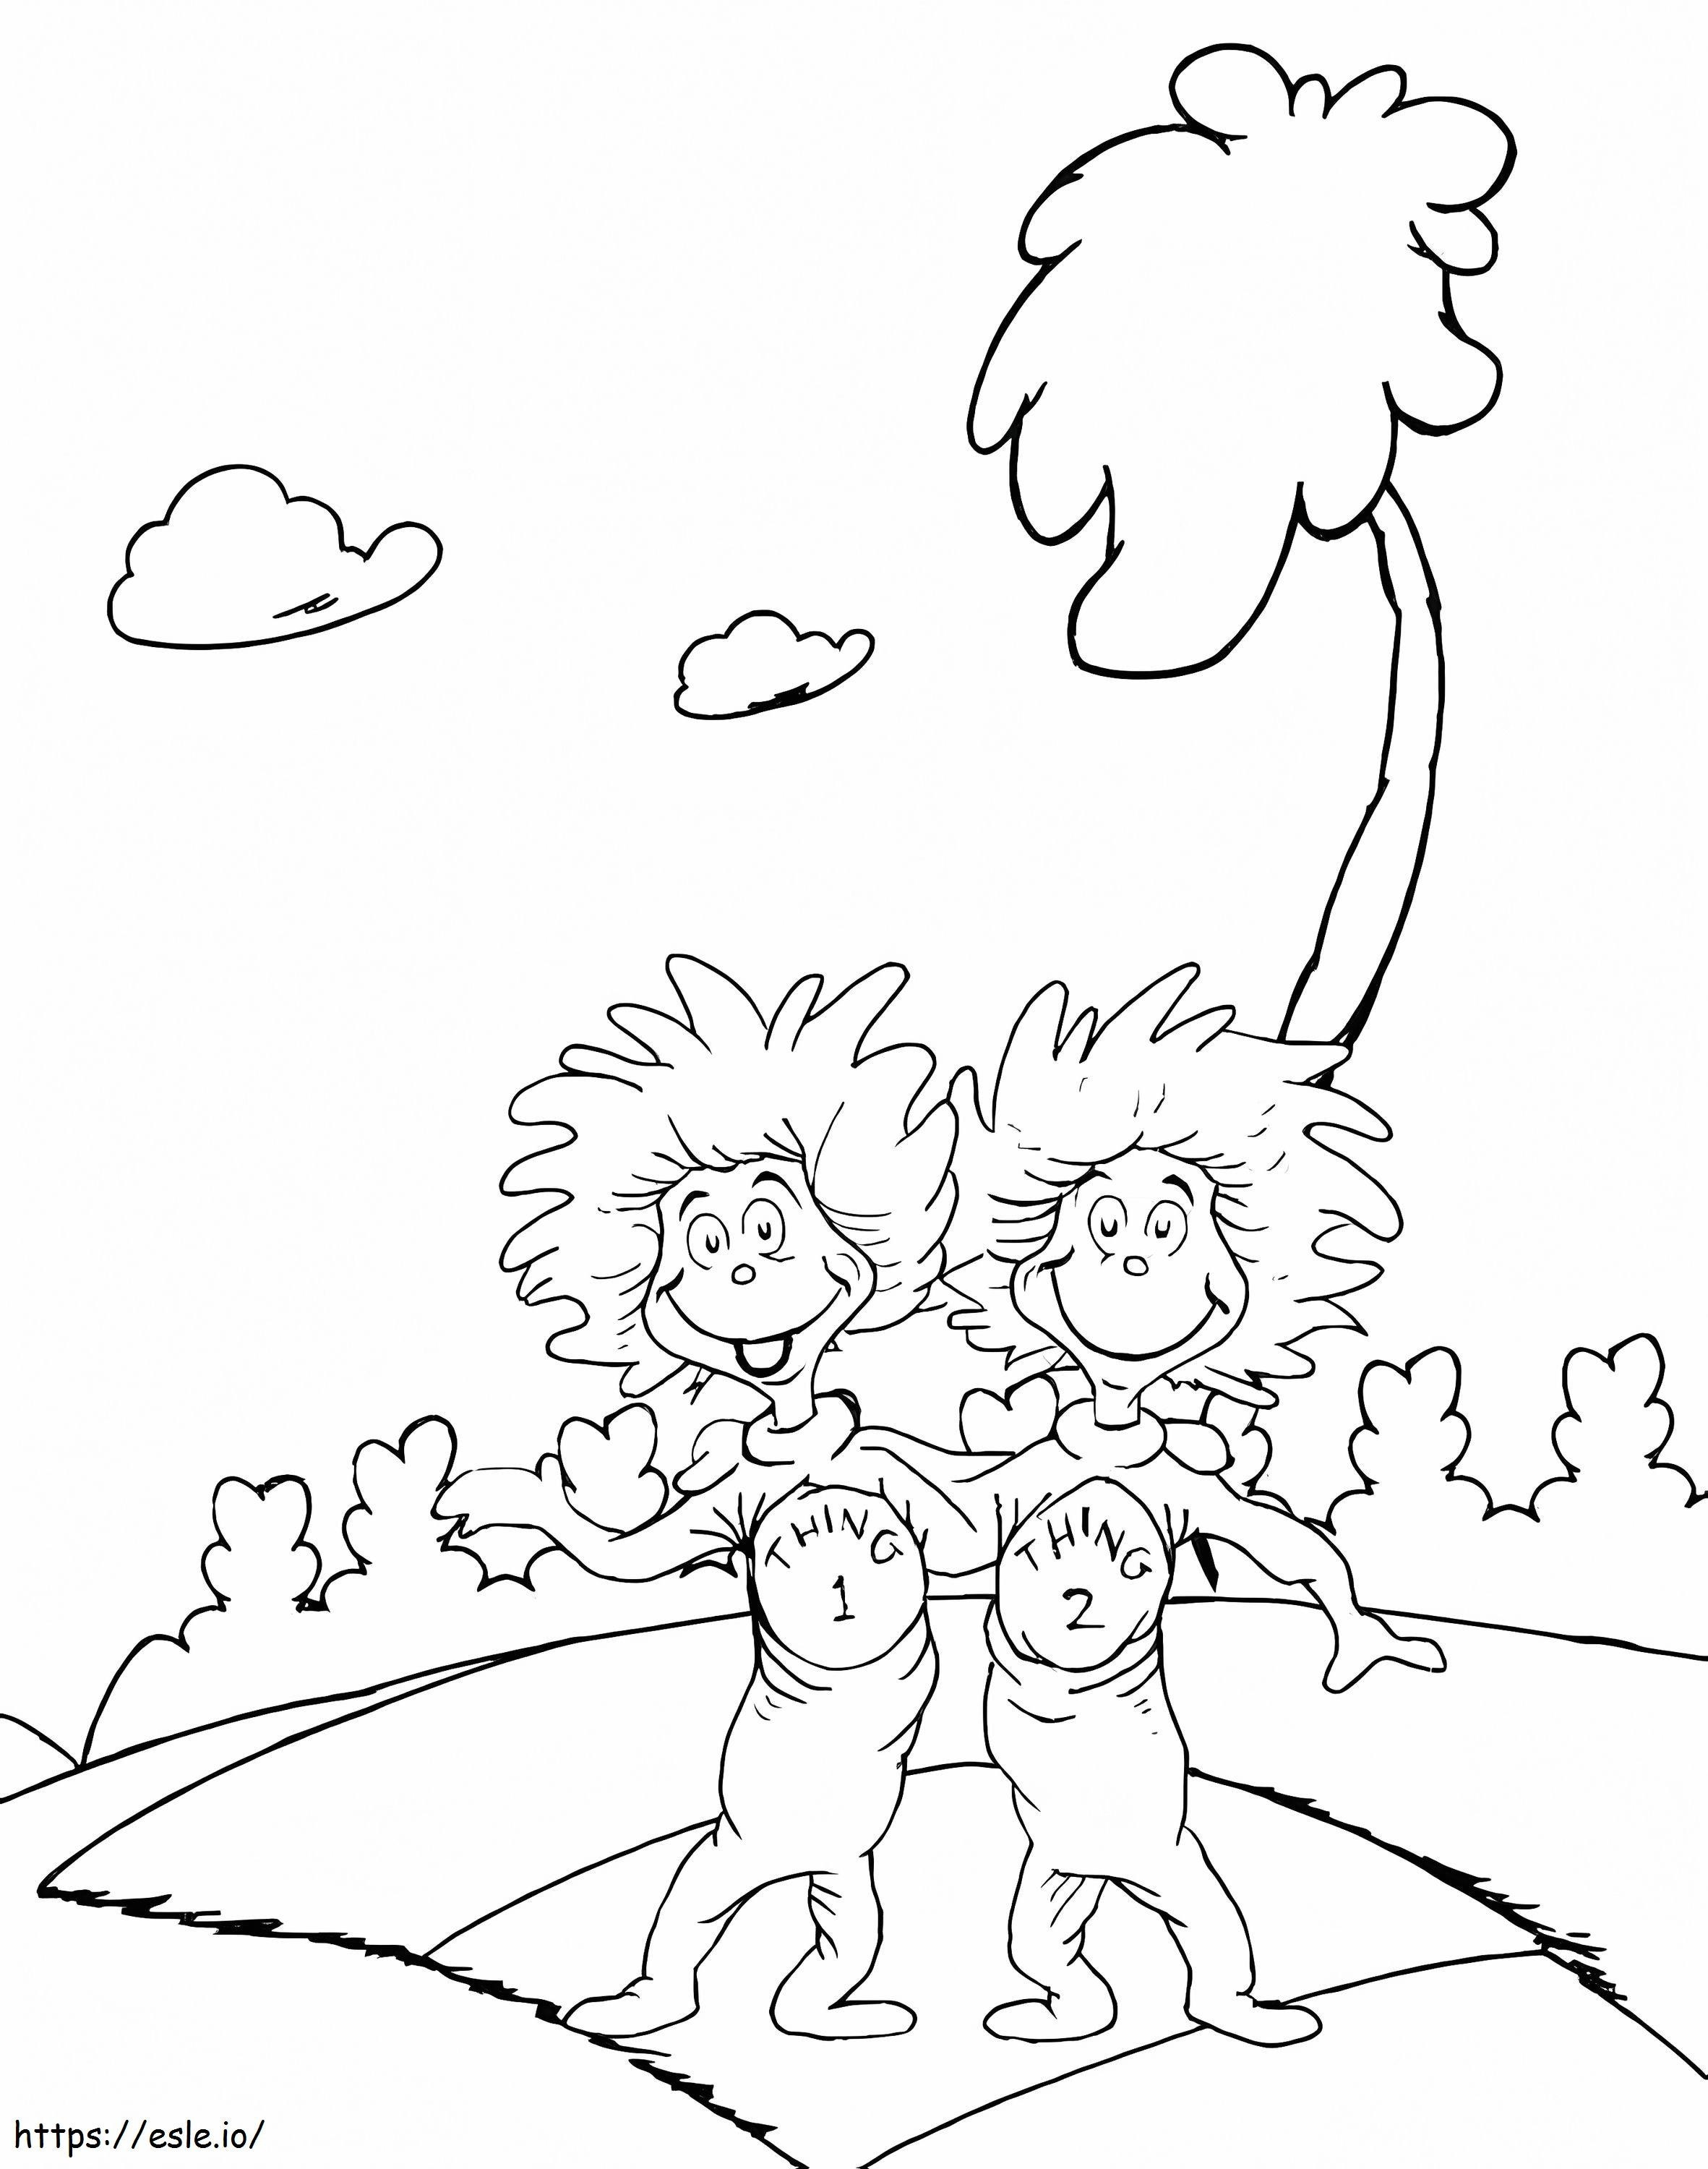 1580721052 E6Dad5Dc571721F4232A7B18Ae1C7Bec coloring page